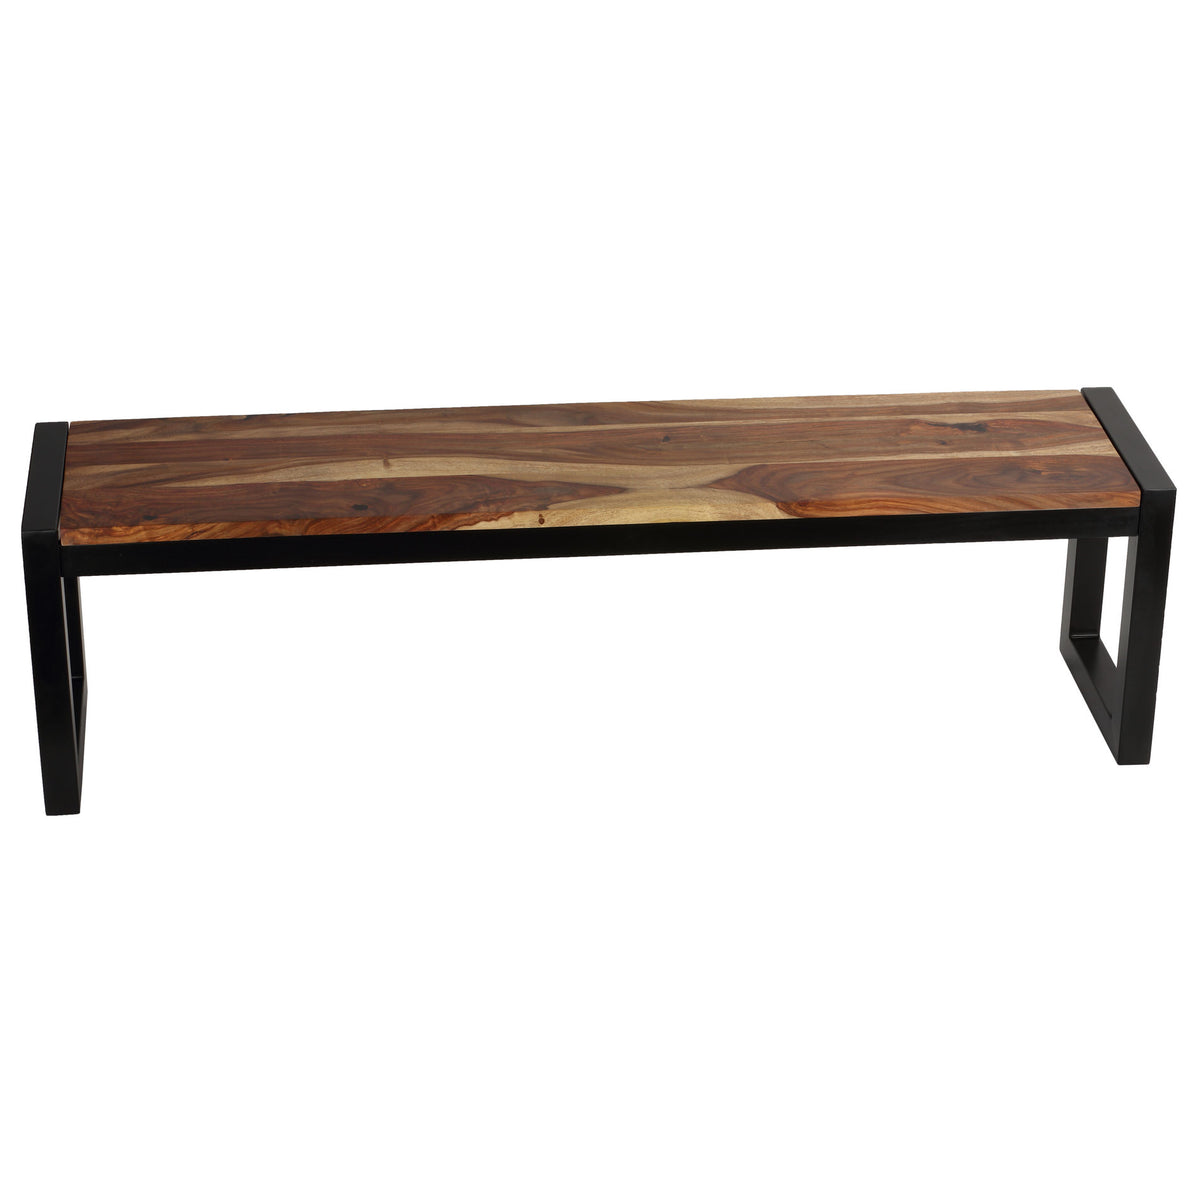 Bare Decor Delia Wood Dining Bench with Metal Base